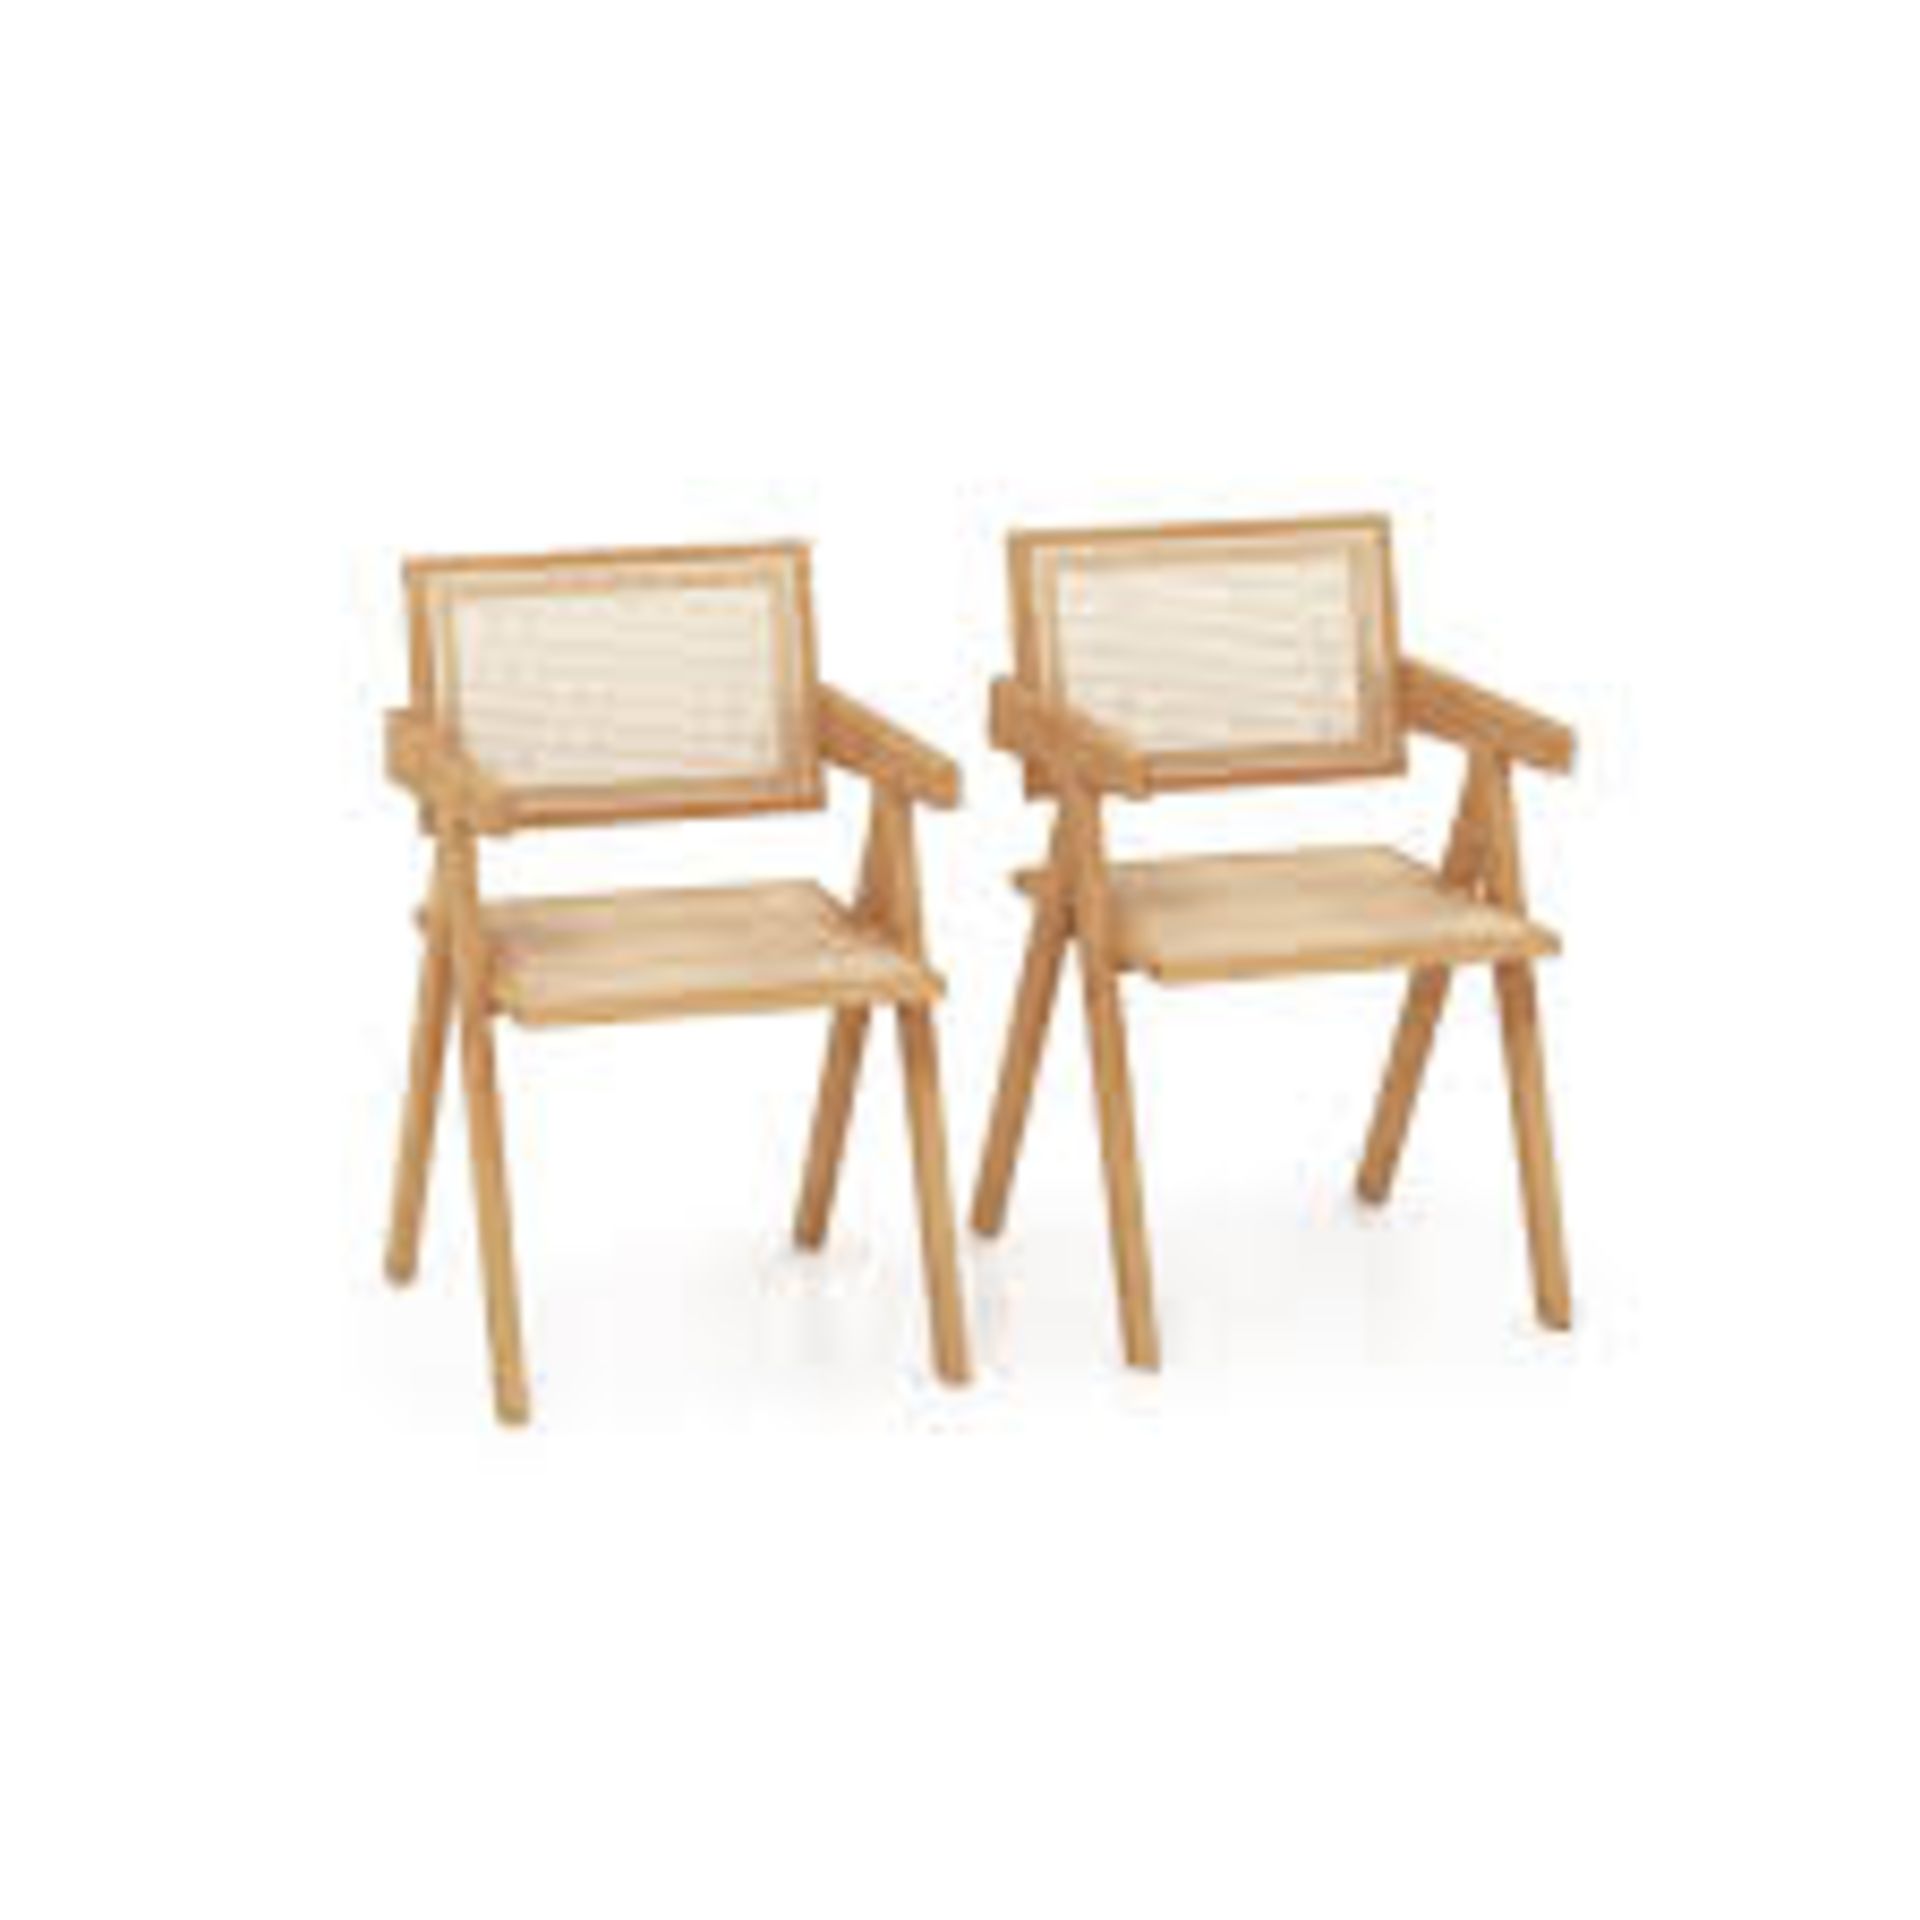 Rattan Accent Chairs Set of 2 with Natural Bamboo Frame-Natural. - R14.6. Crafted from high-